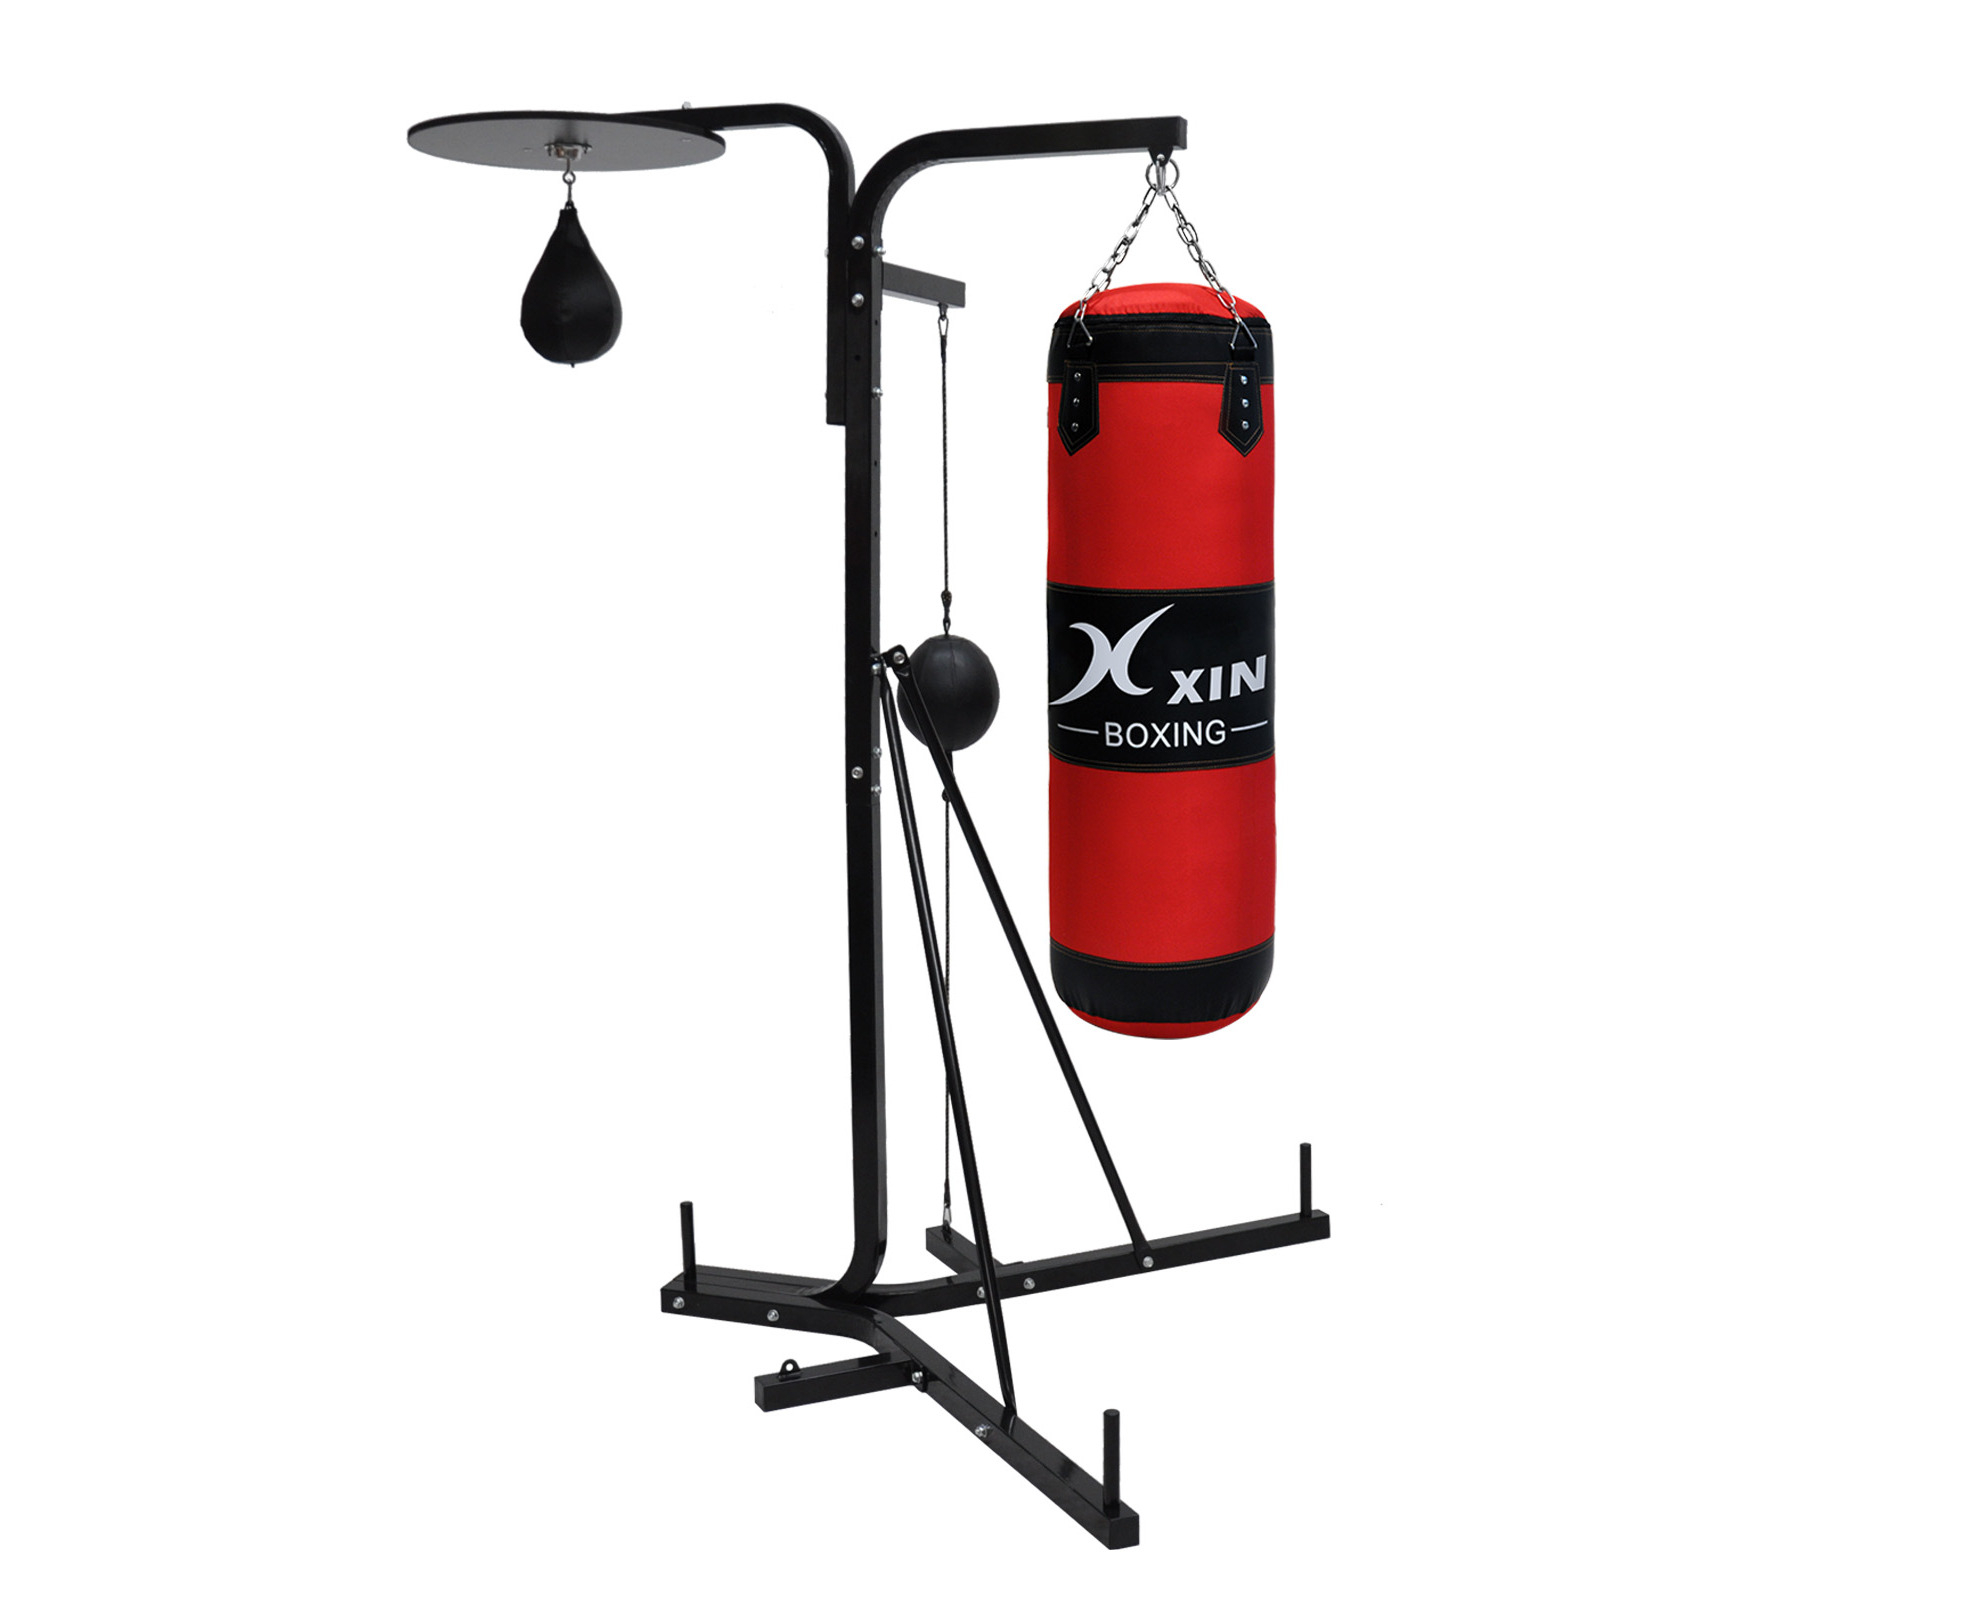 3 in 1 Boxing Punching Bag Stand - 20kg Punch Bag + Speed Ball and ...